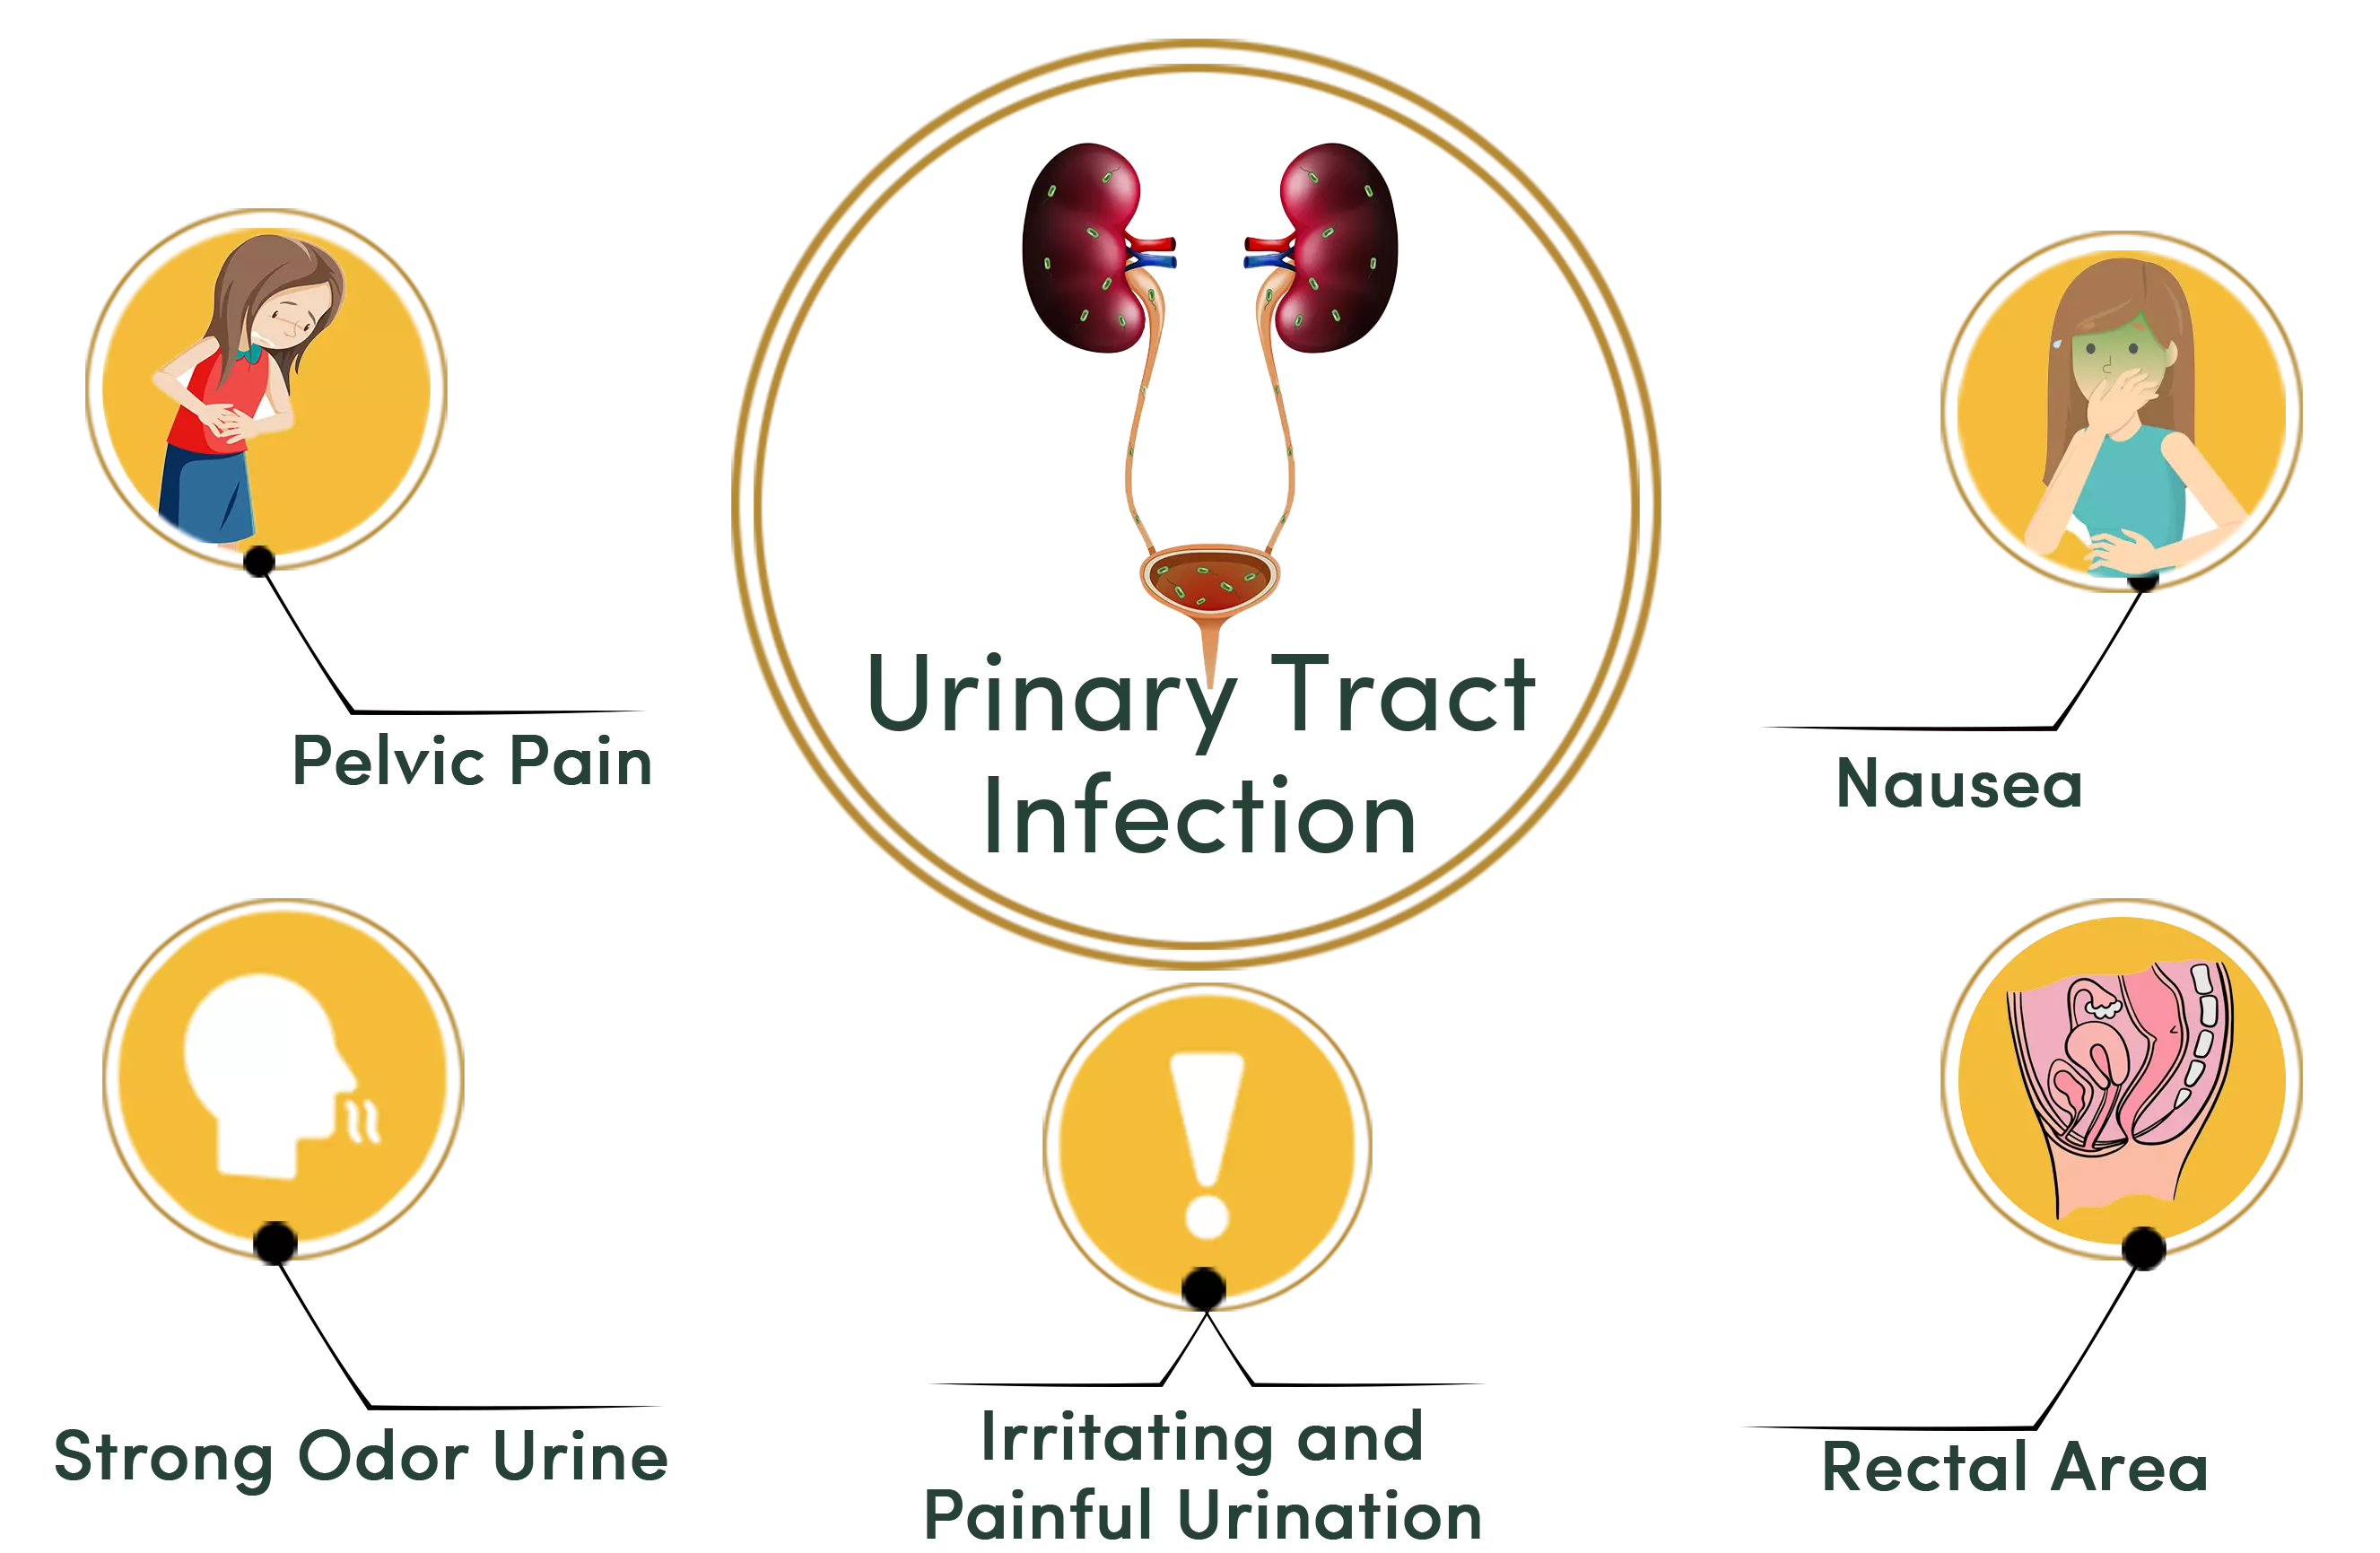 Urinary Tract Infection symptoms infographic